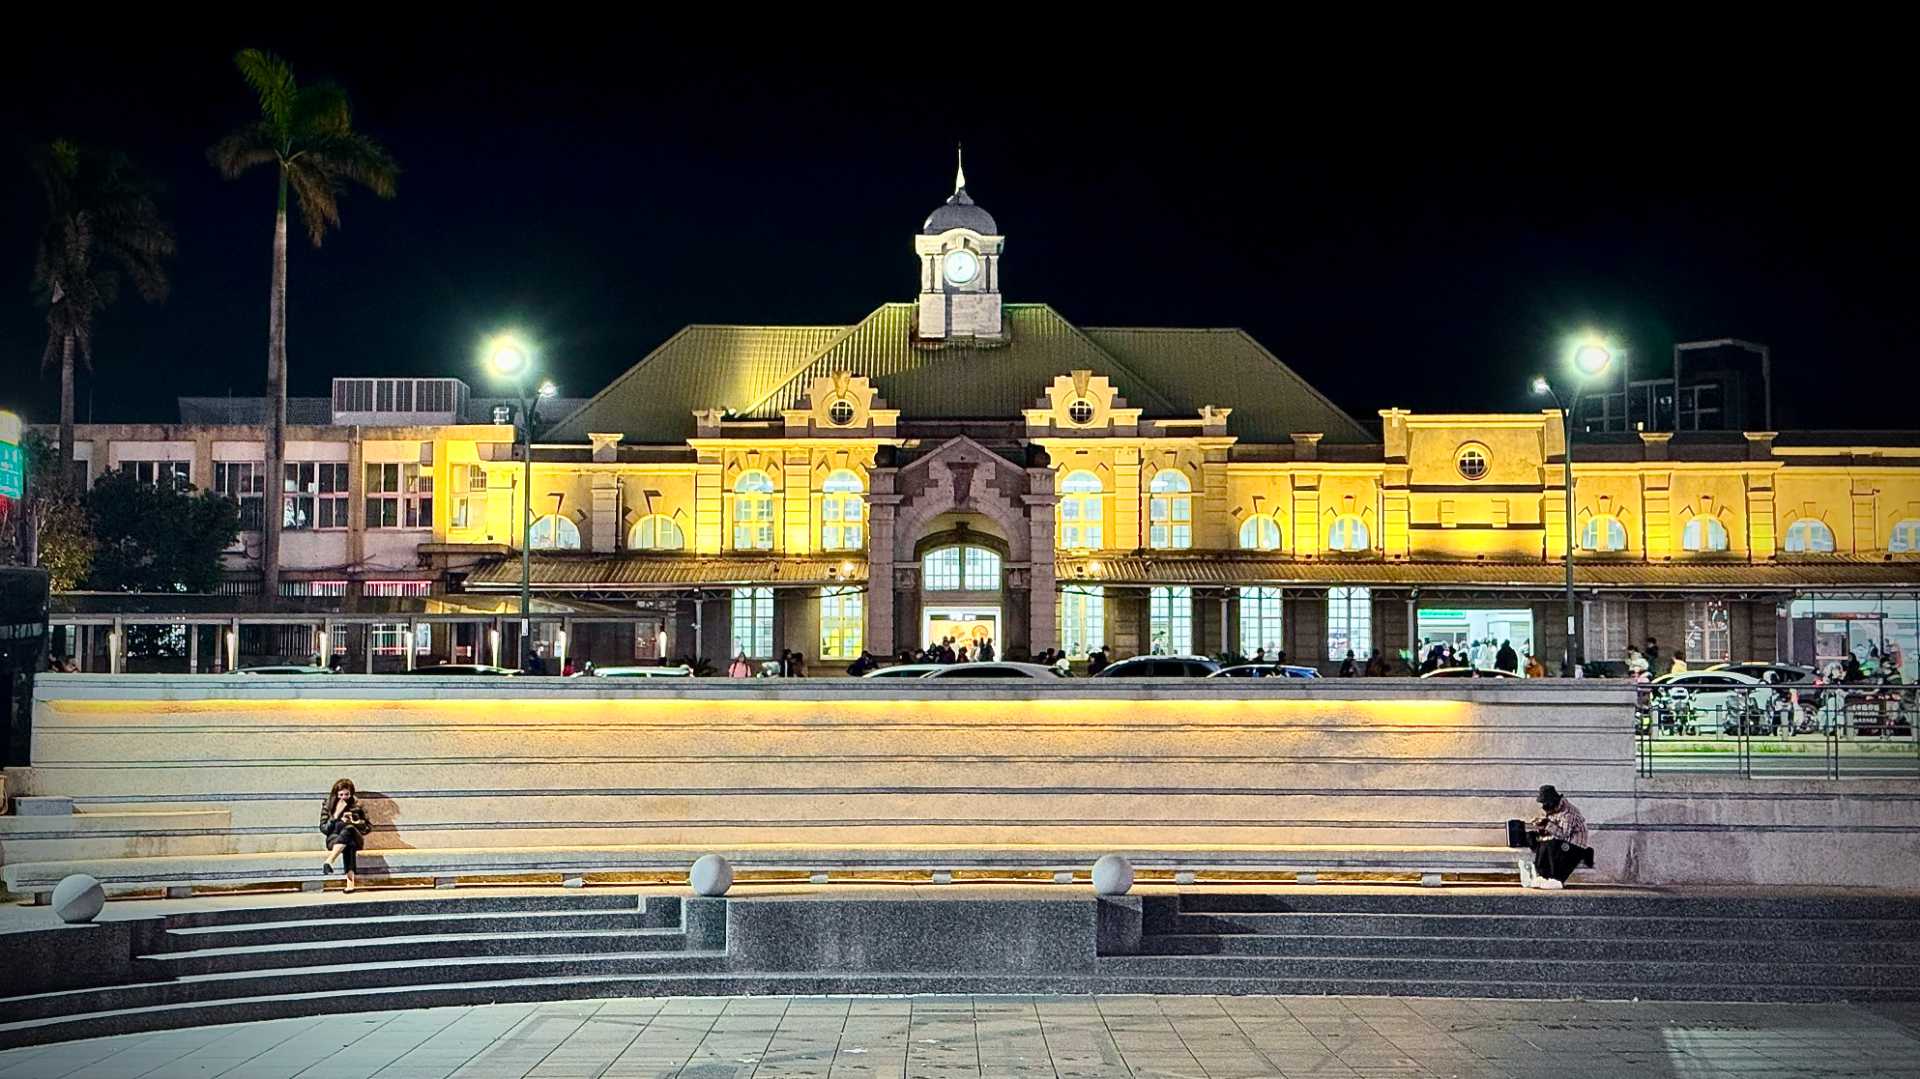 Wide-angle shot of Hsinchu Railway Station at night. Two people are sitting in a wide, shallow ampitheater in the foreground.